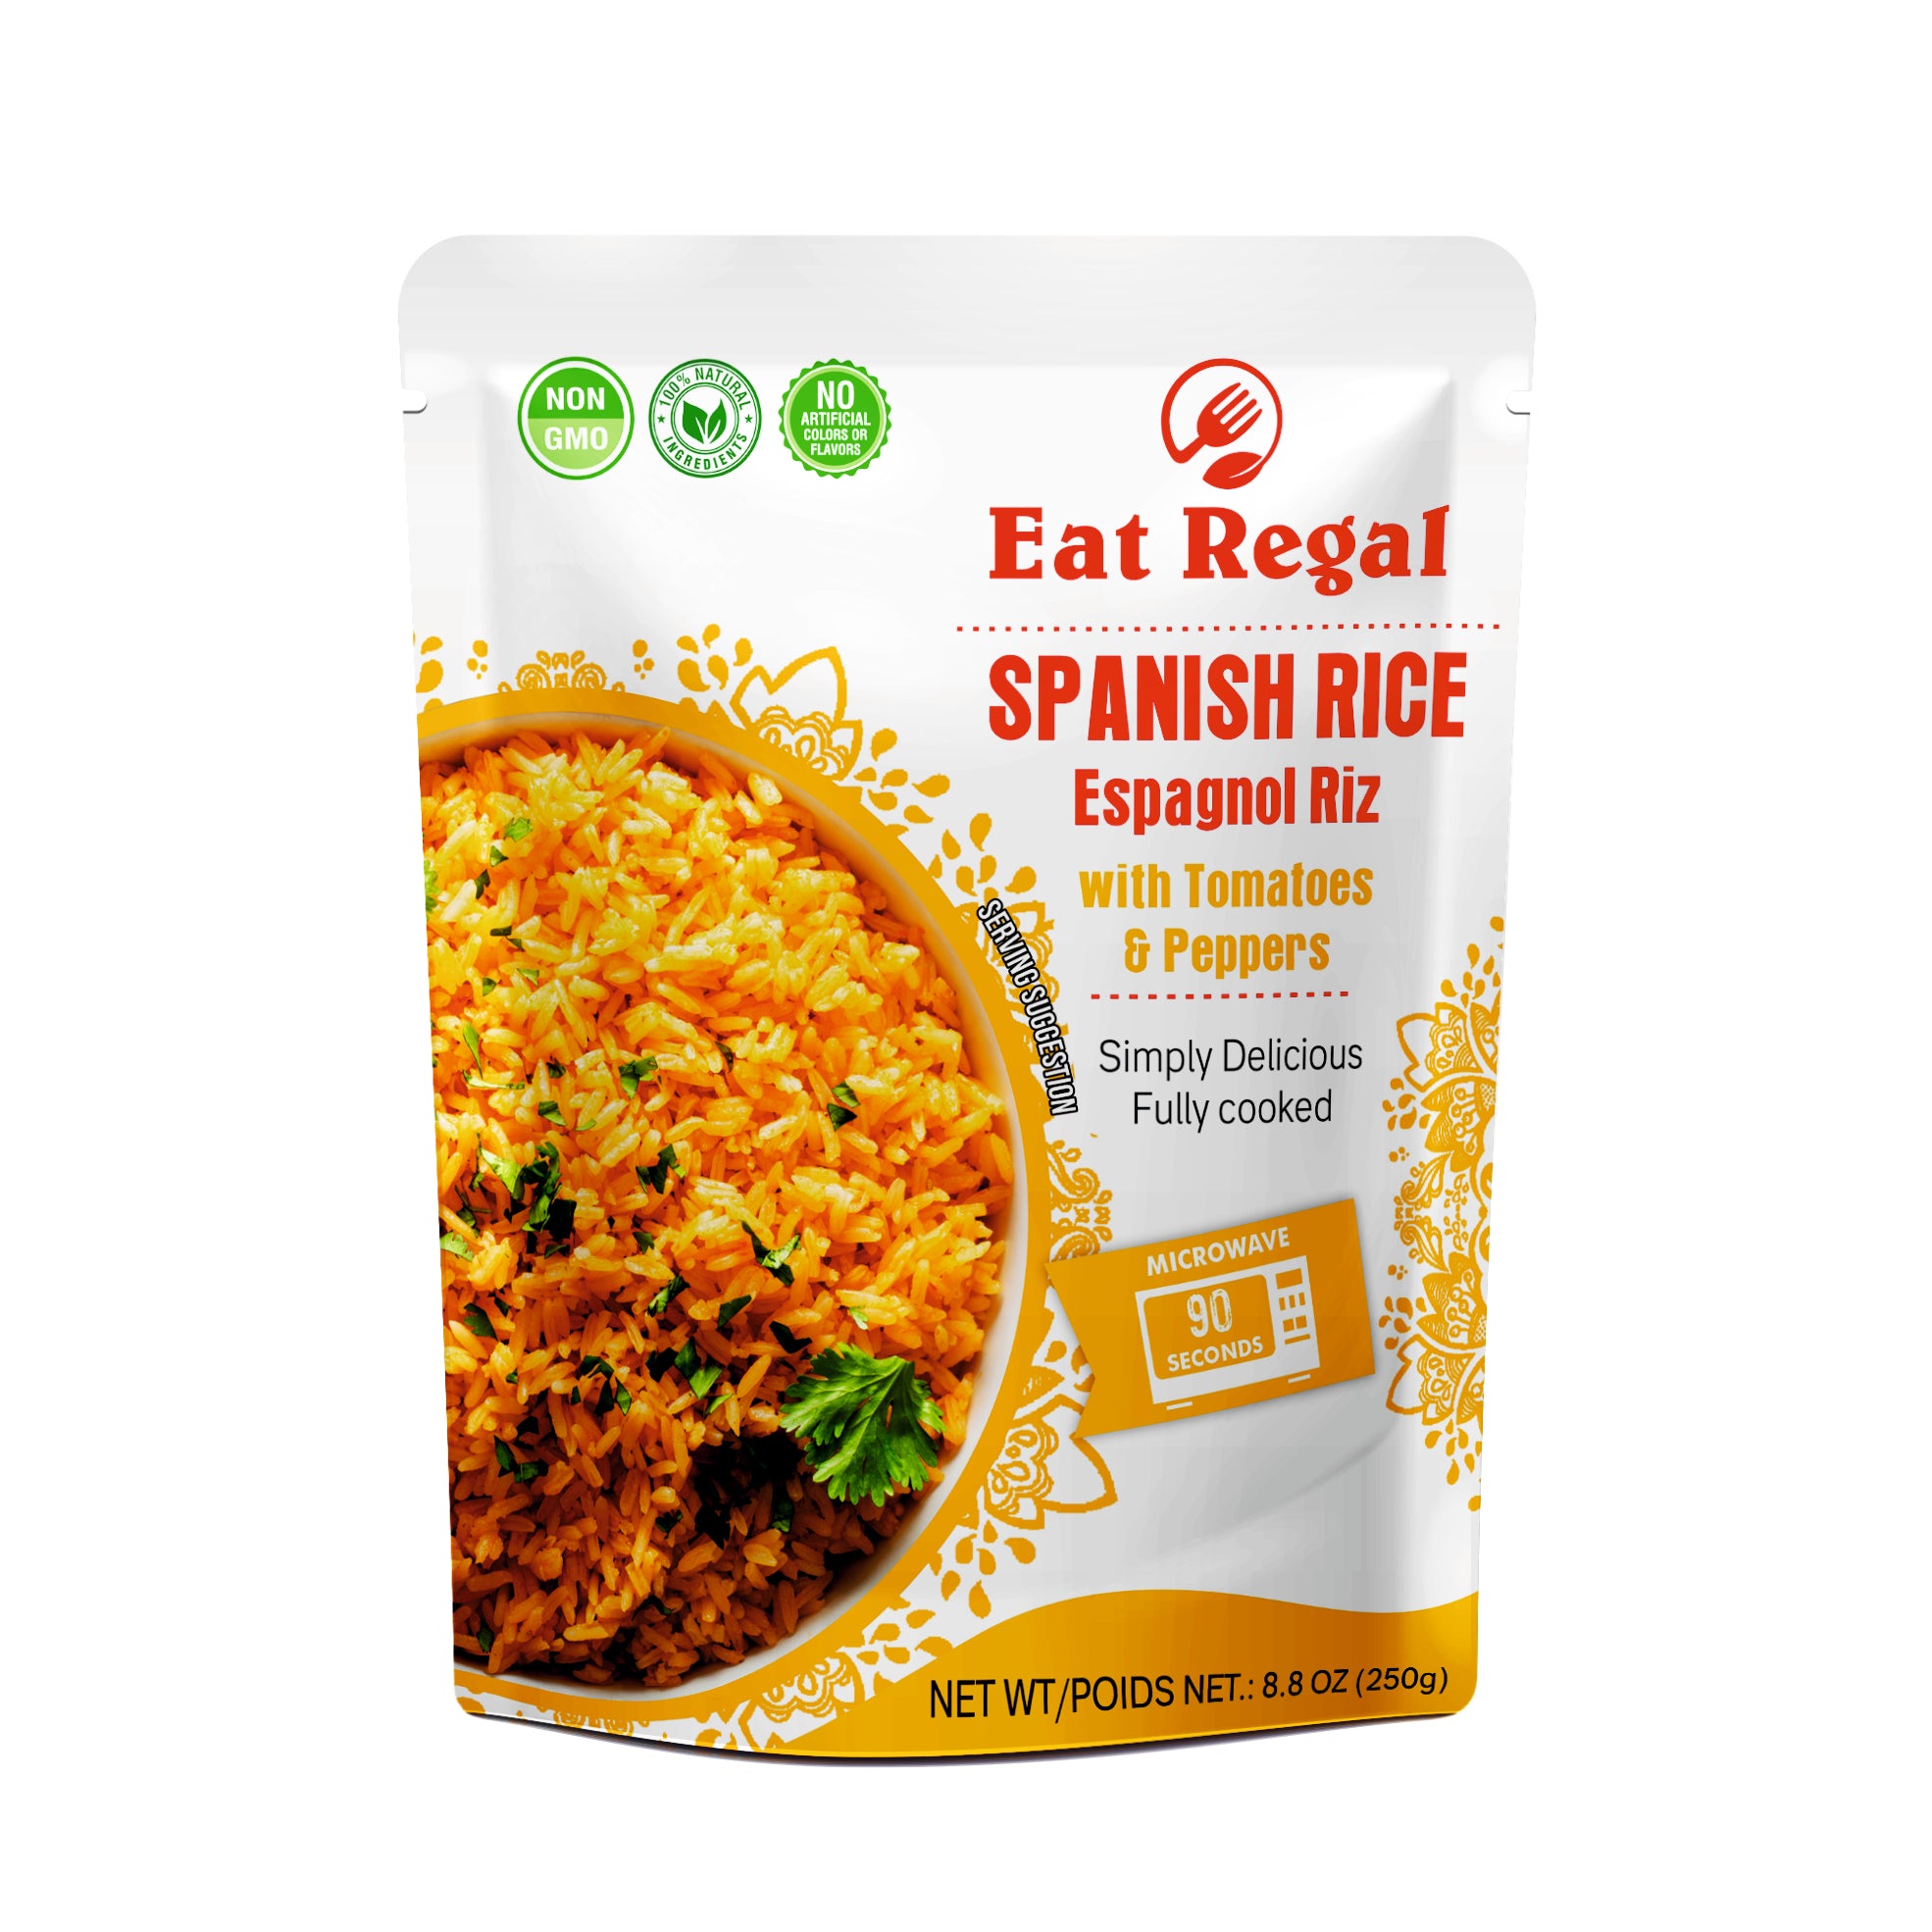 Eat Regal Spanish Rice - Ready in 90 Seconds